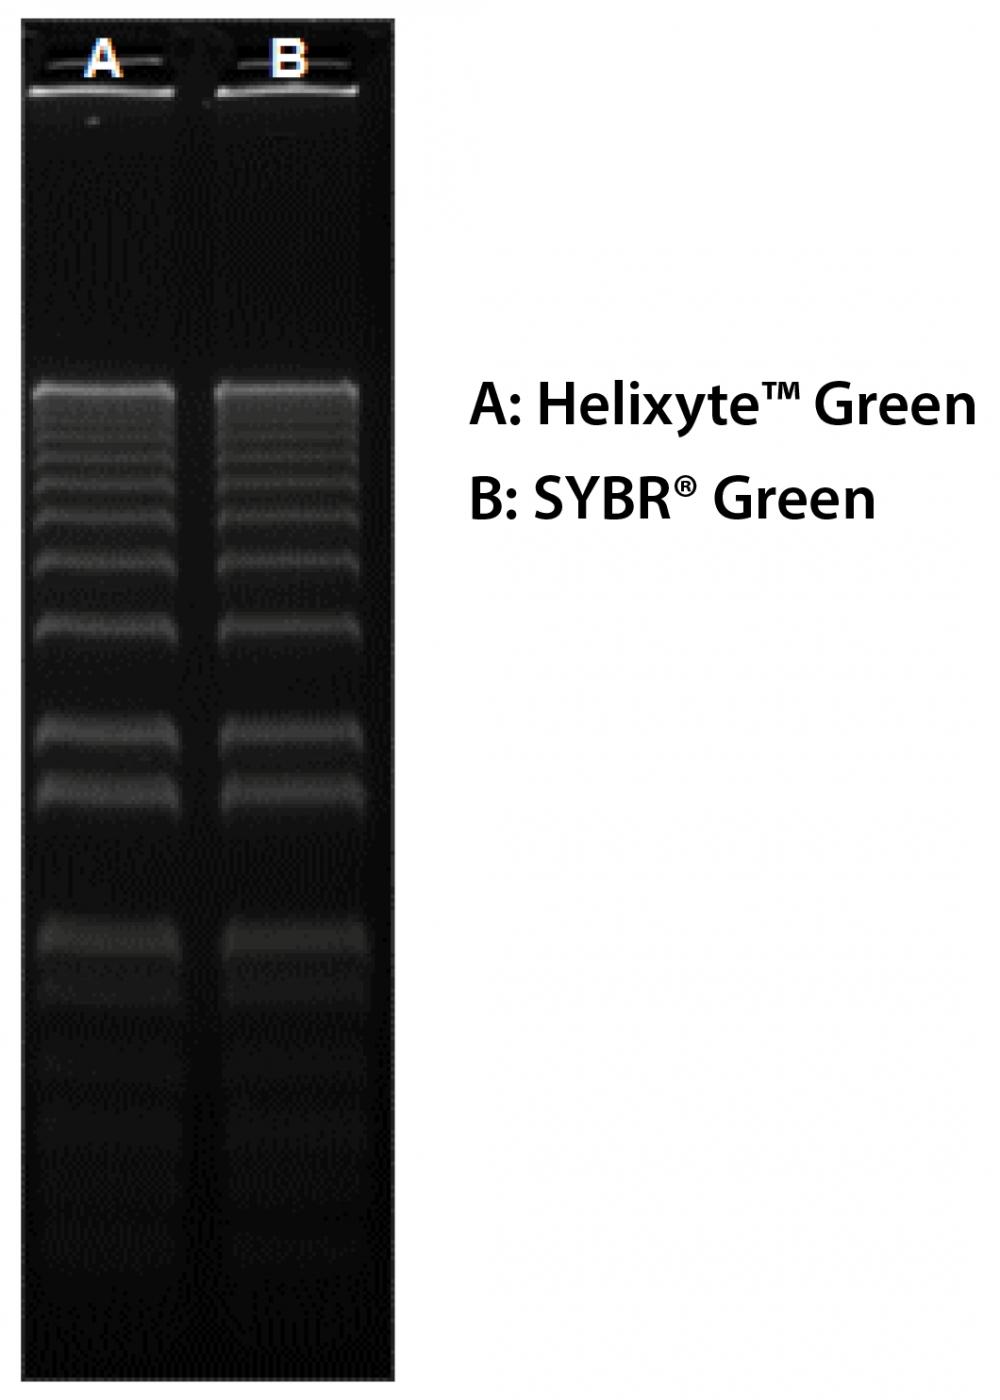 160 ng of 1 Kb Plus DNA Ladder (ThermoFisher 10787018) in 0.9% agarose/TBE electrophoresis gel were stained with Helixyte™ Green and SYBR® Green and imaged with 254-nm UV transilluminator using UVP Bioimaging System.